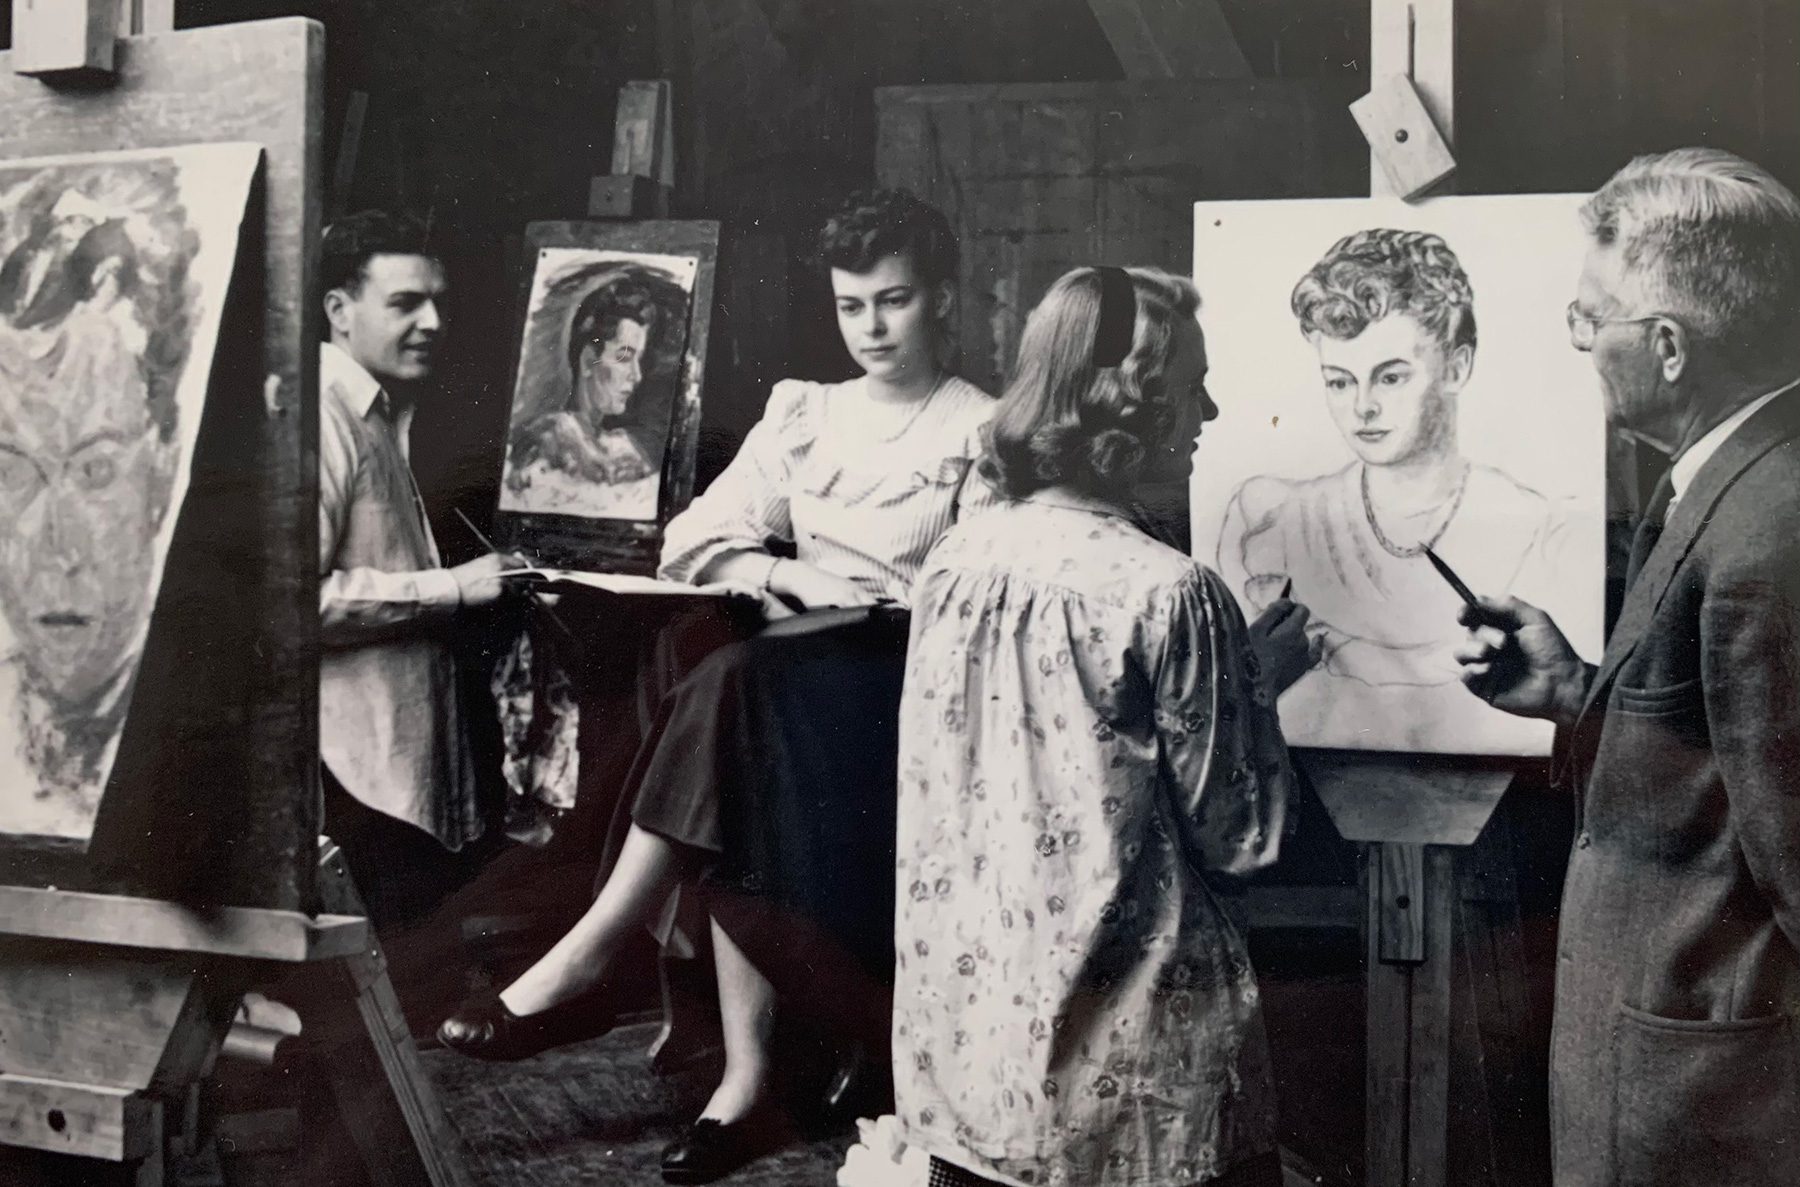 Black and white archival photograph of H. Willard Ortlip teaching painting.